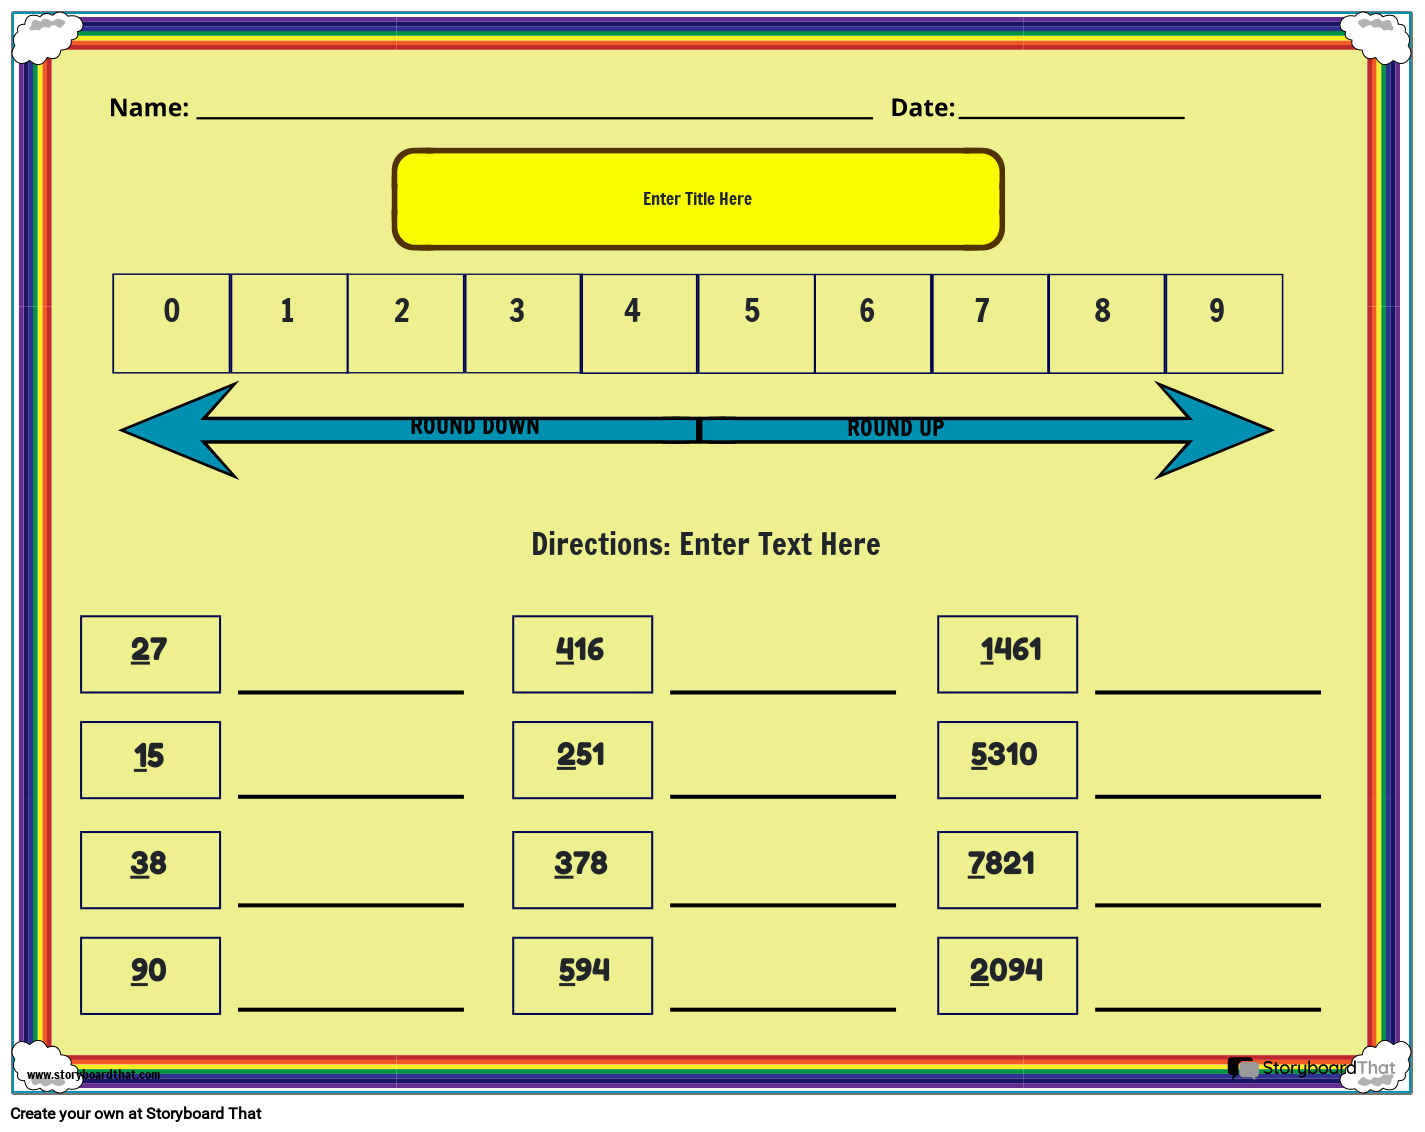 Print-ready rounding tens and hundreds worksheets